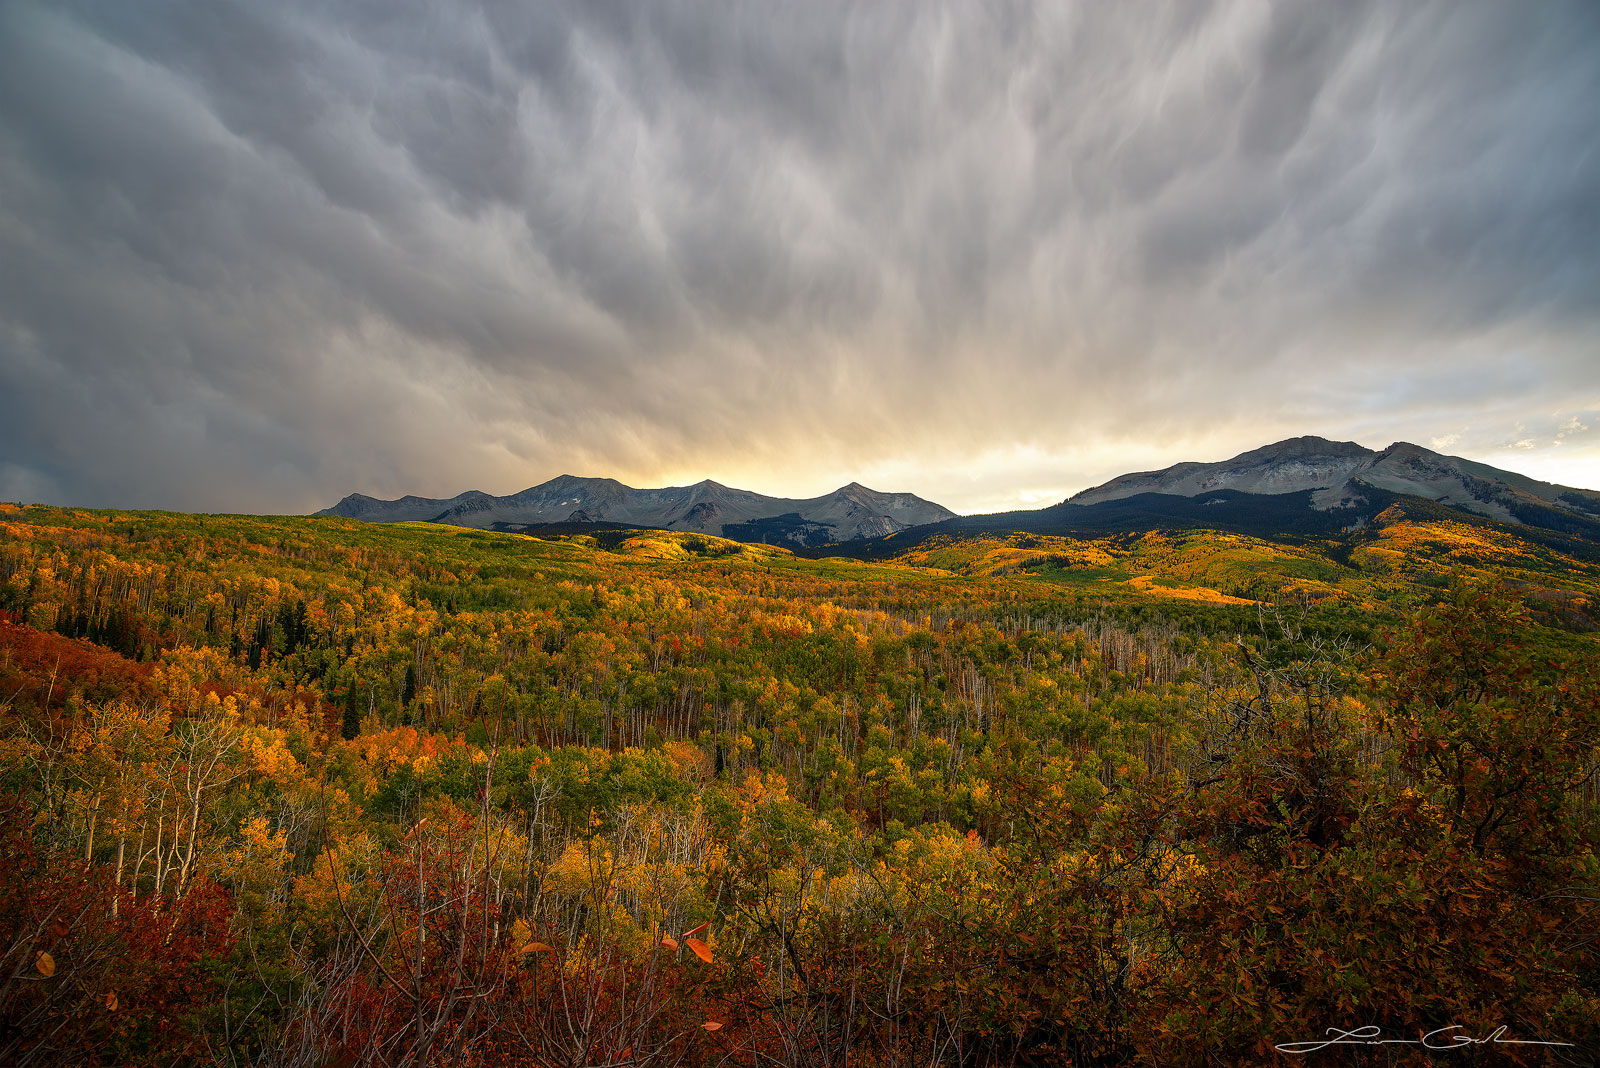 Colorado Kebler Pass Aspen Forests with Dramatic Skies Fall Colors Fine Art Image. - Gintchin Fine Art